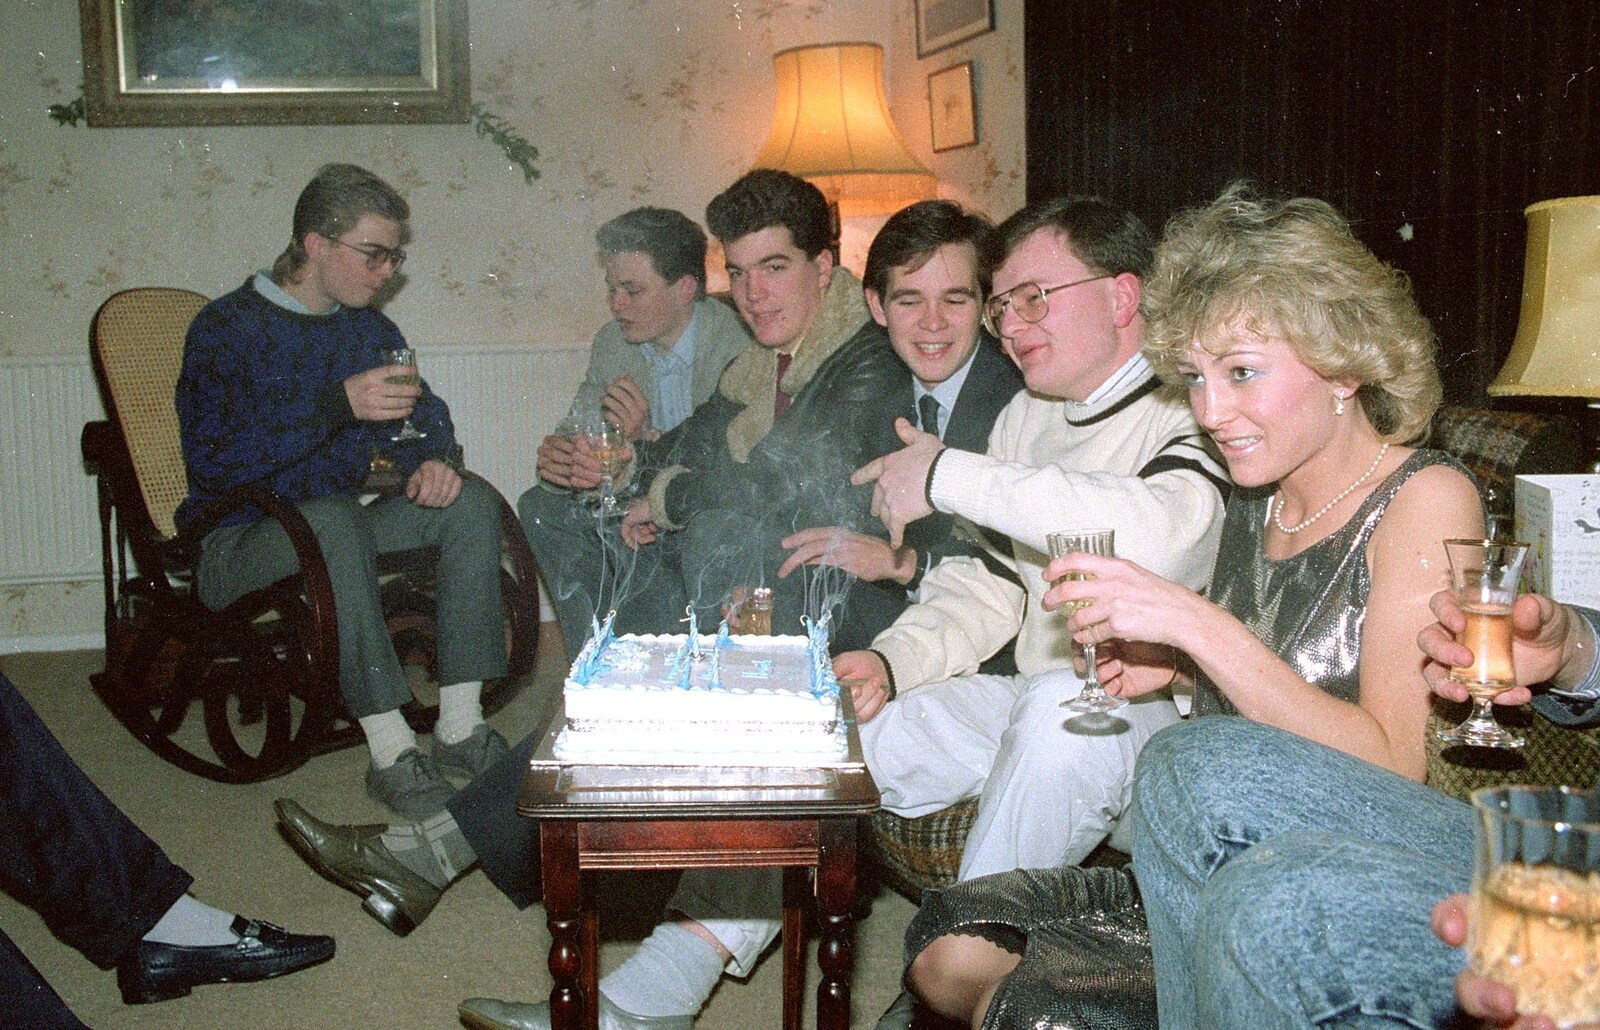 A smoking birthday cake from Hamish's 21st and Christmas, New Milton and Bransgore - 25th December 1987